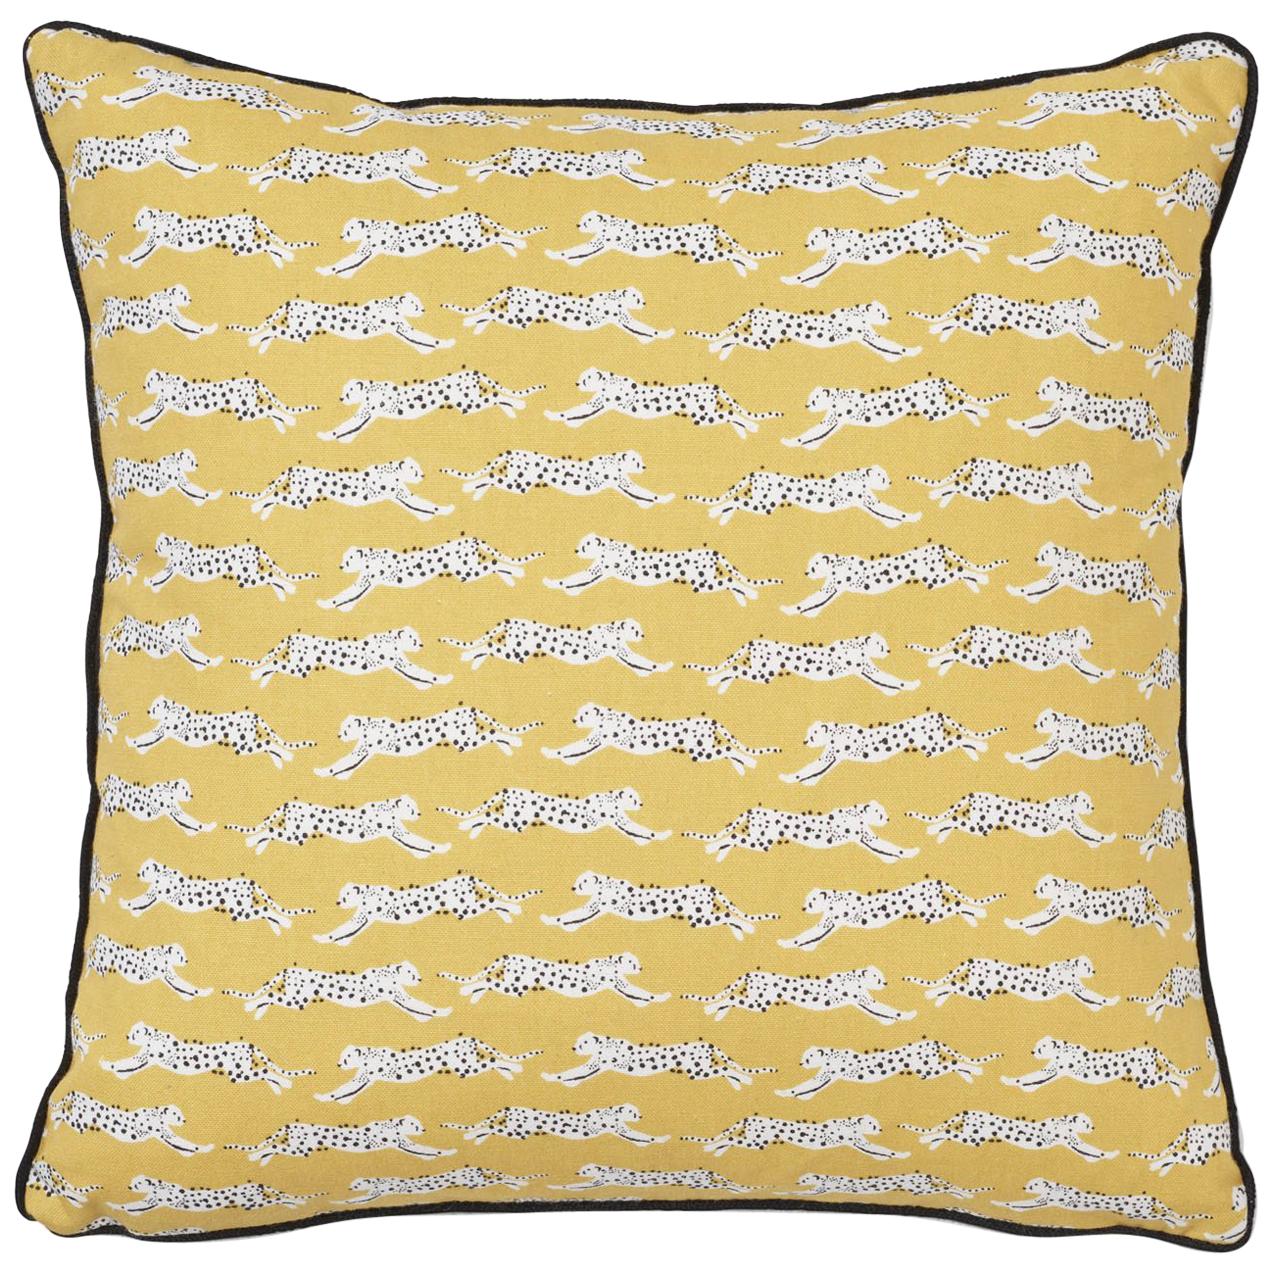 Schumacher Leaping Leopards Yellow Two-Sided Cotton Pillow